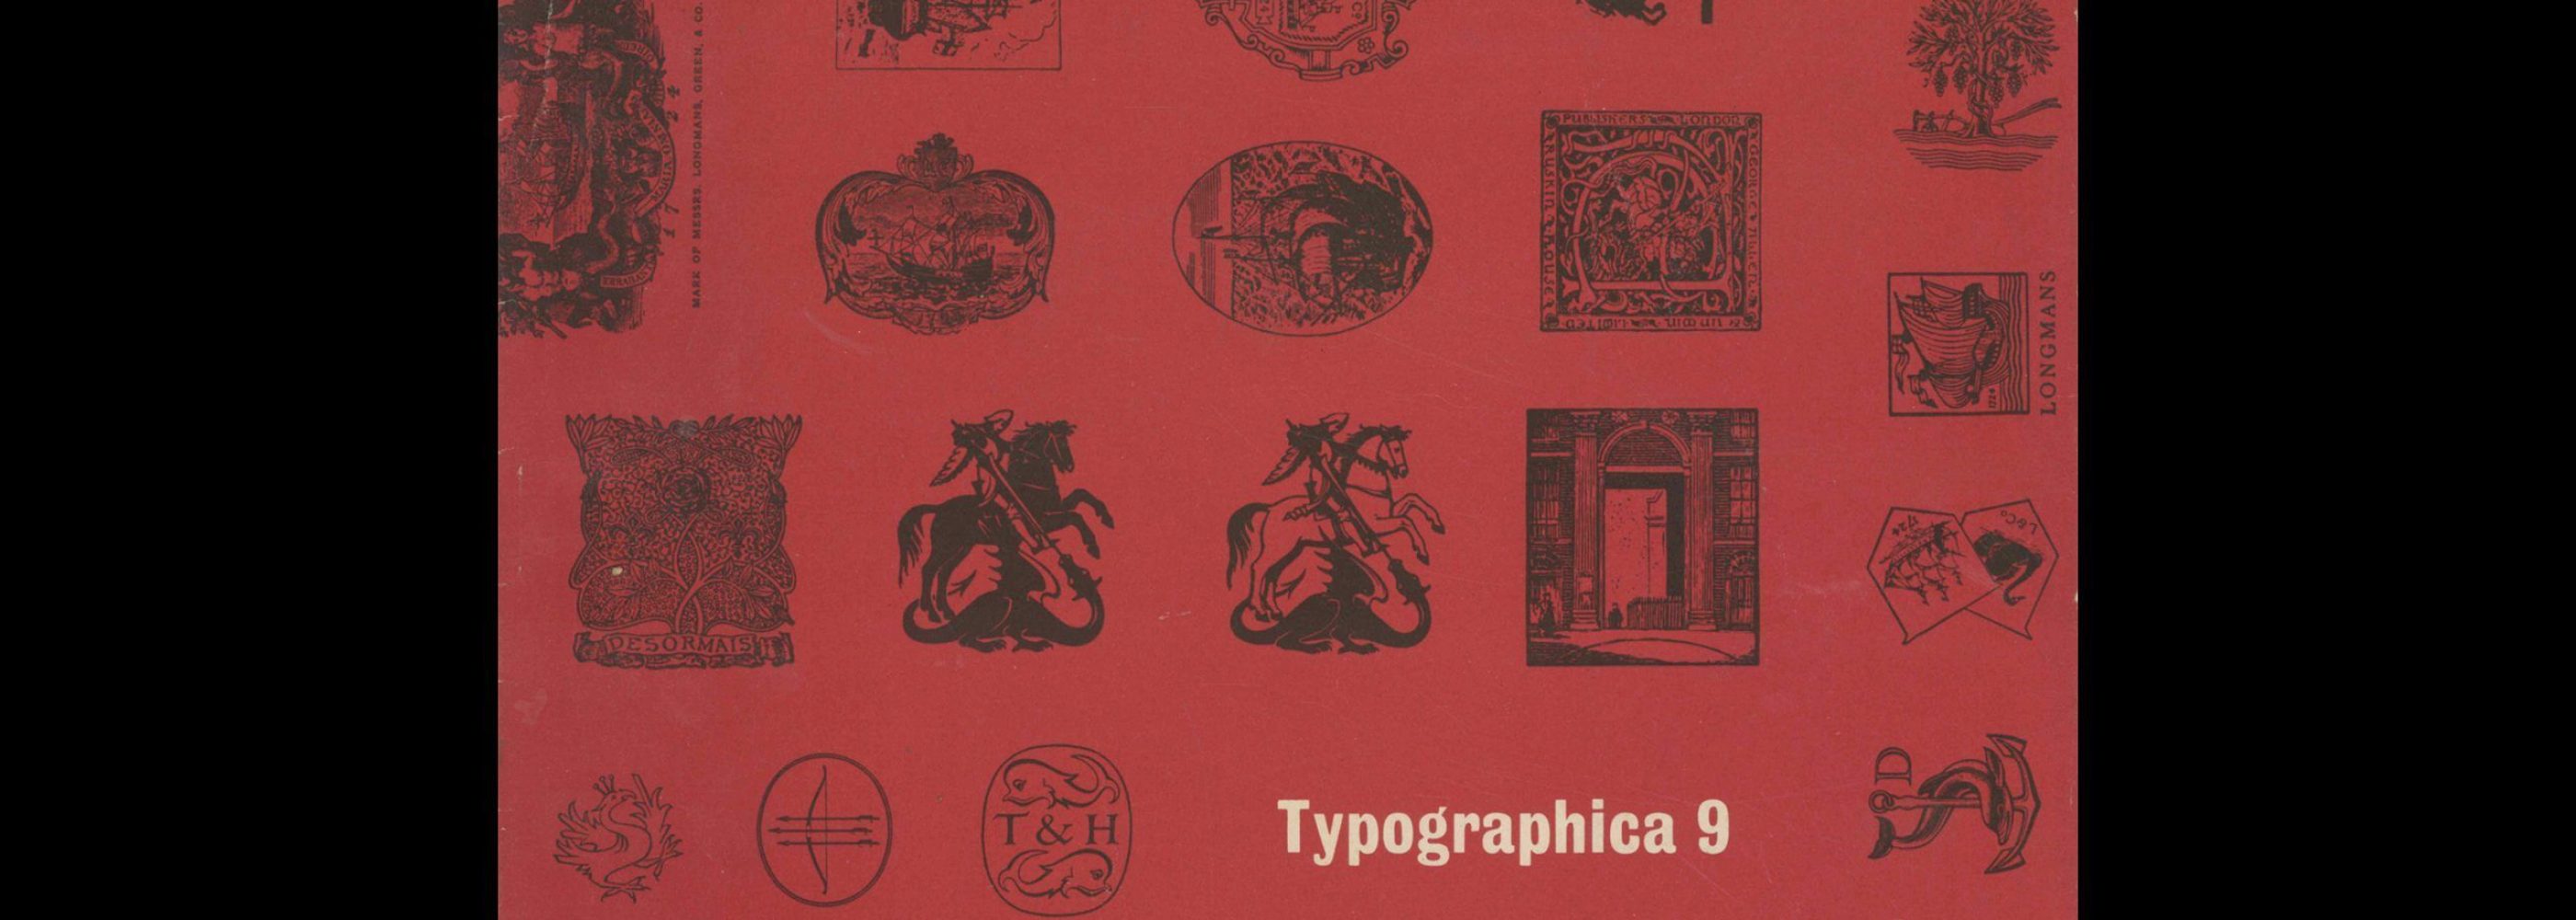 Typographica, Old Series 9, 1954